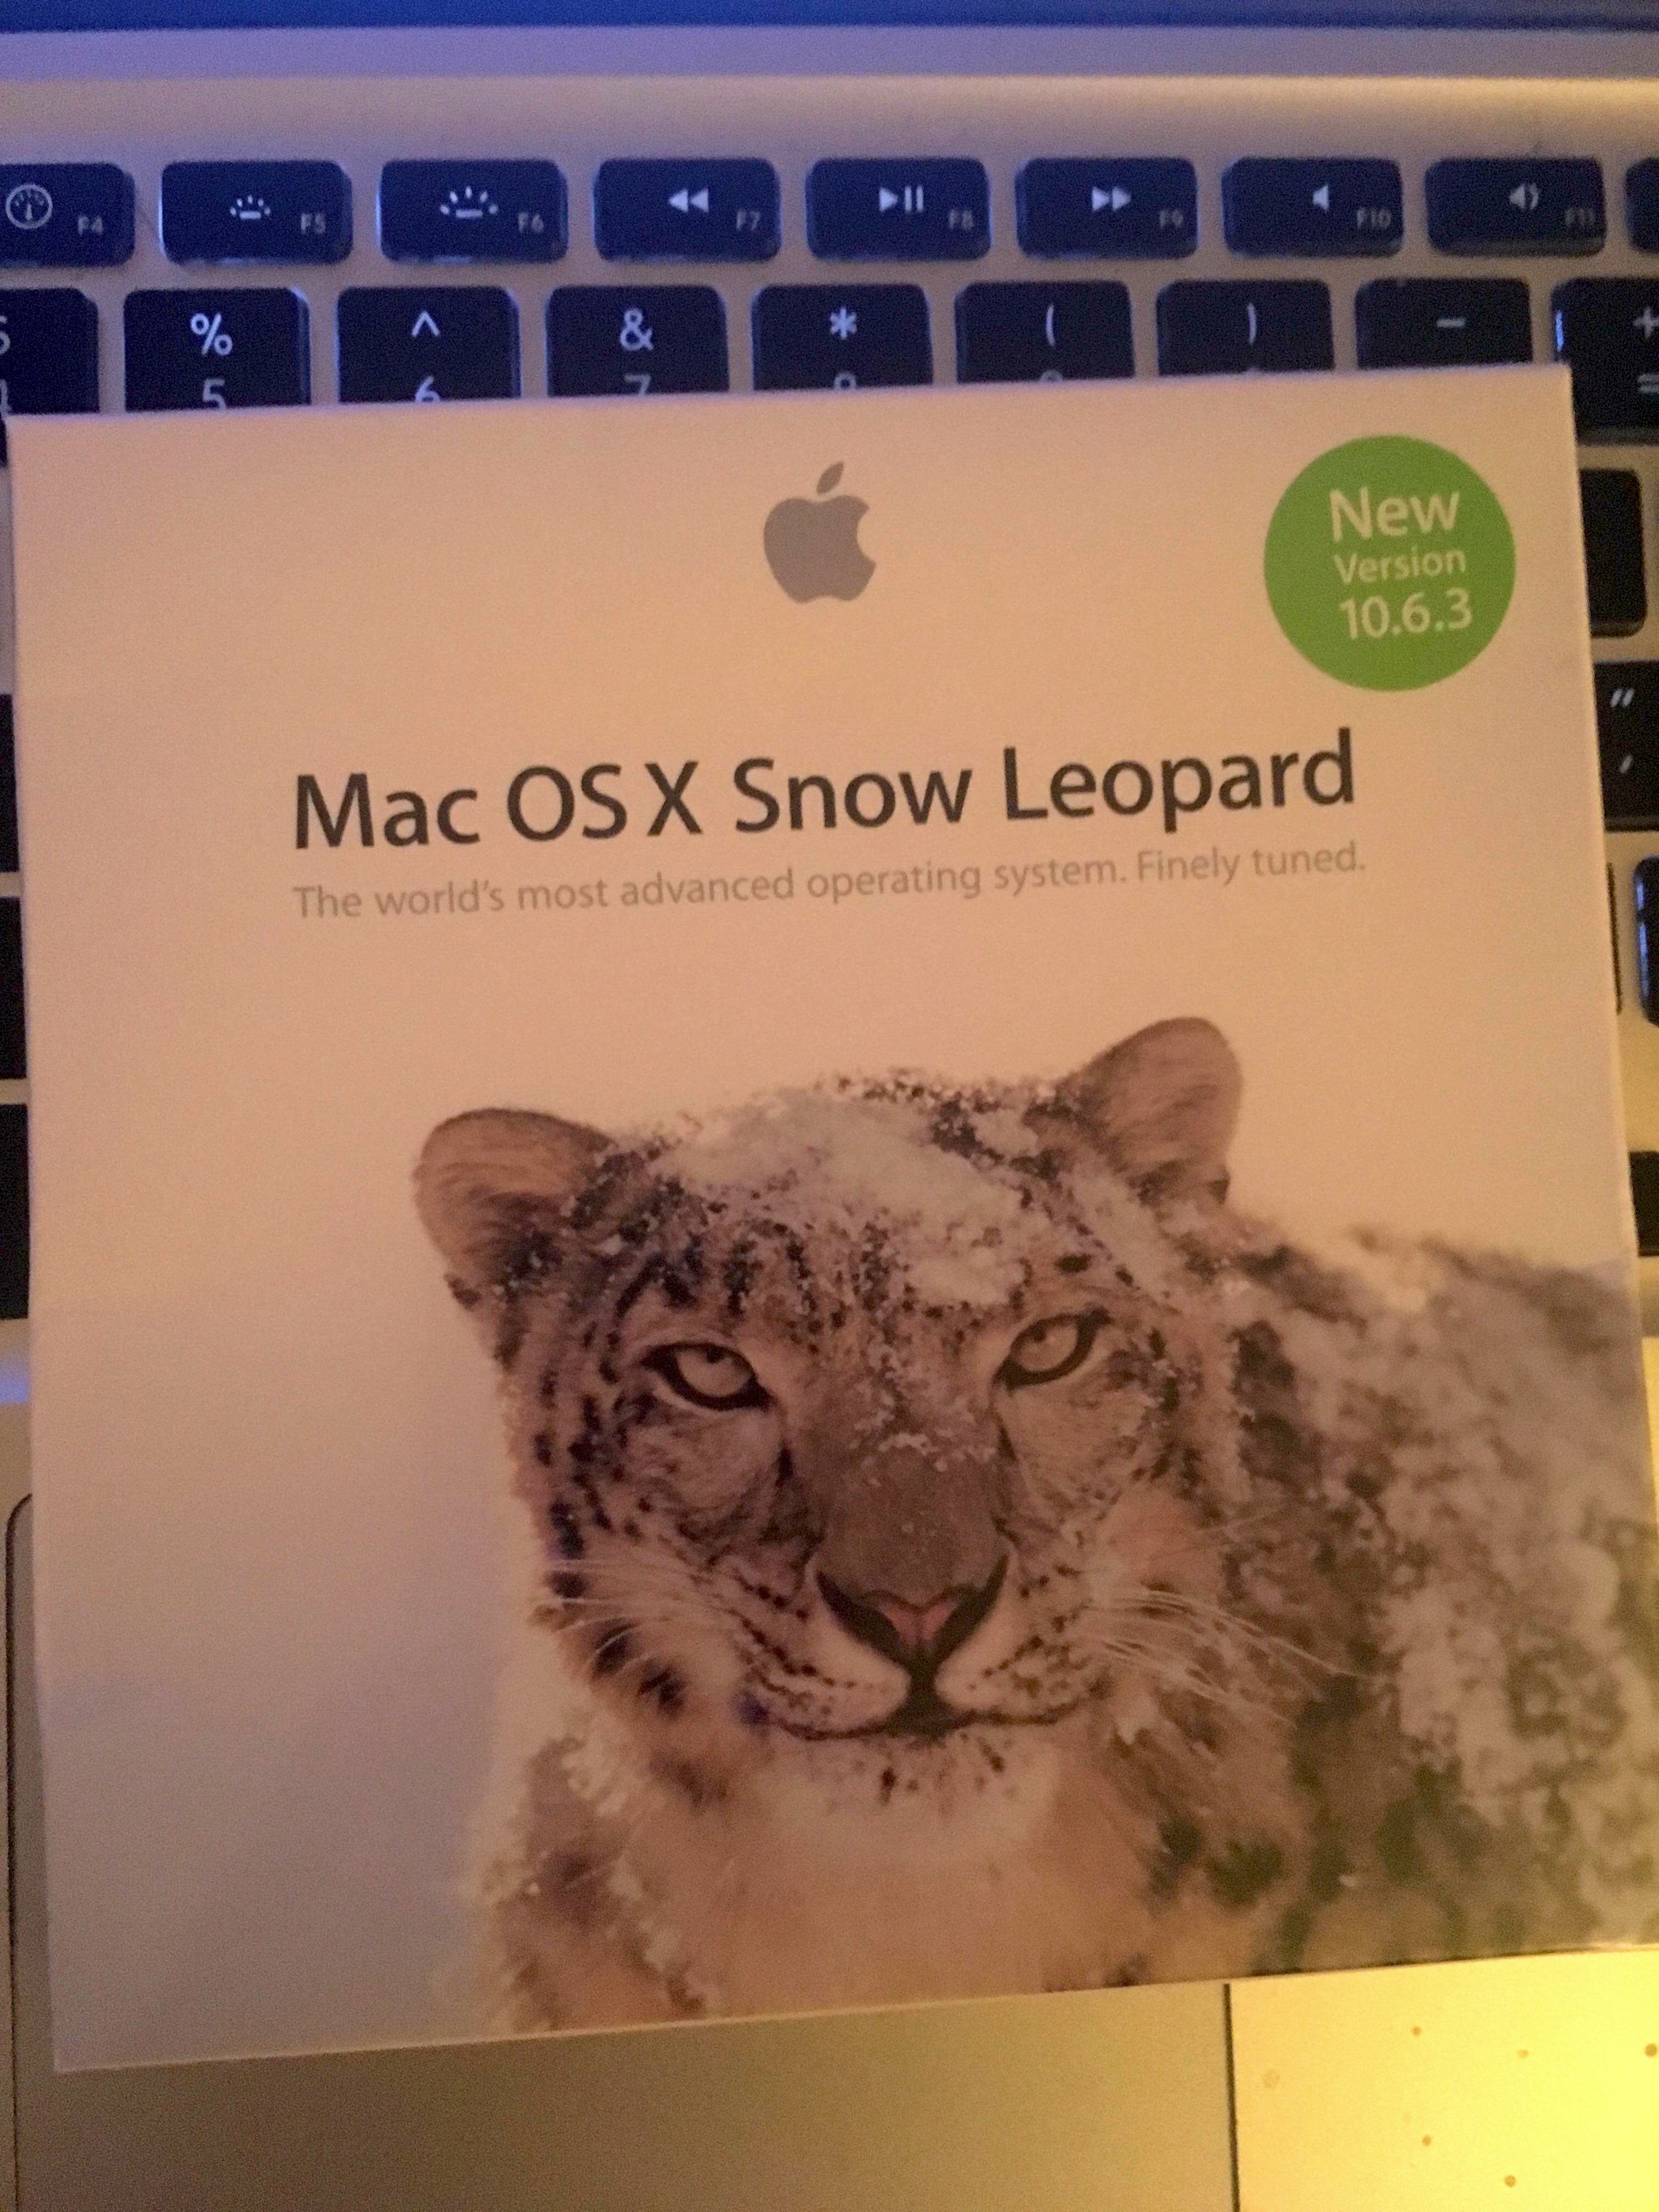 free download word 2011 mac version for snow leopard 10.6.8